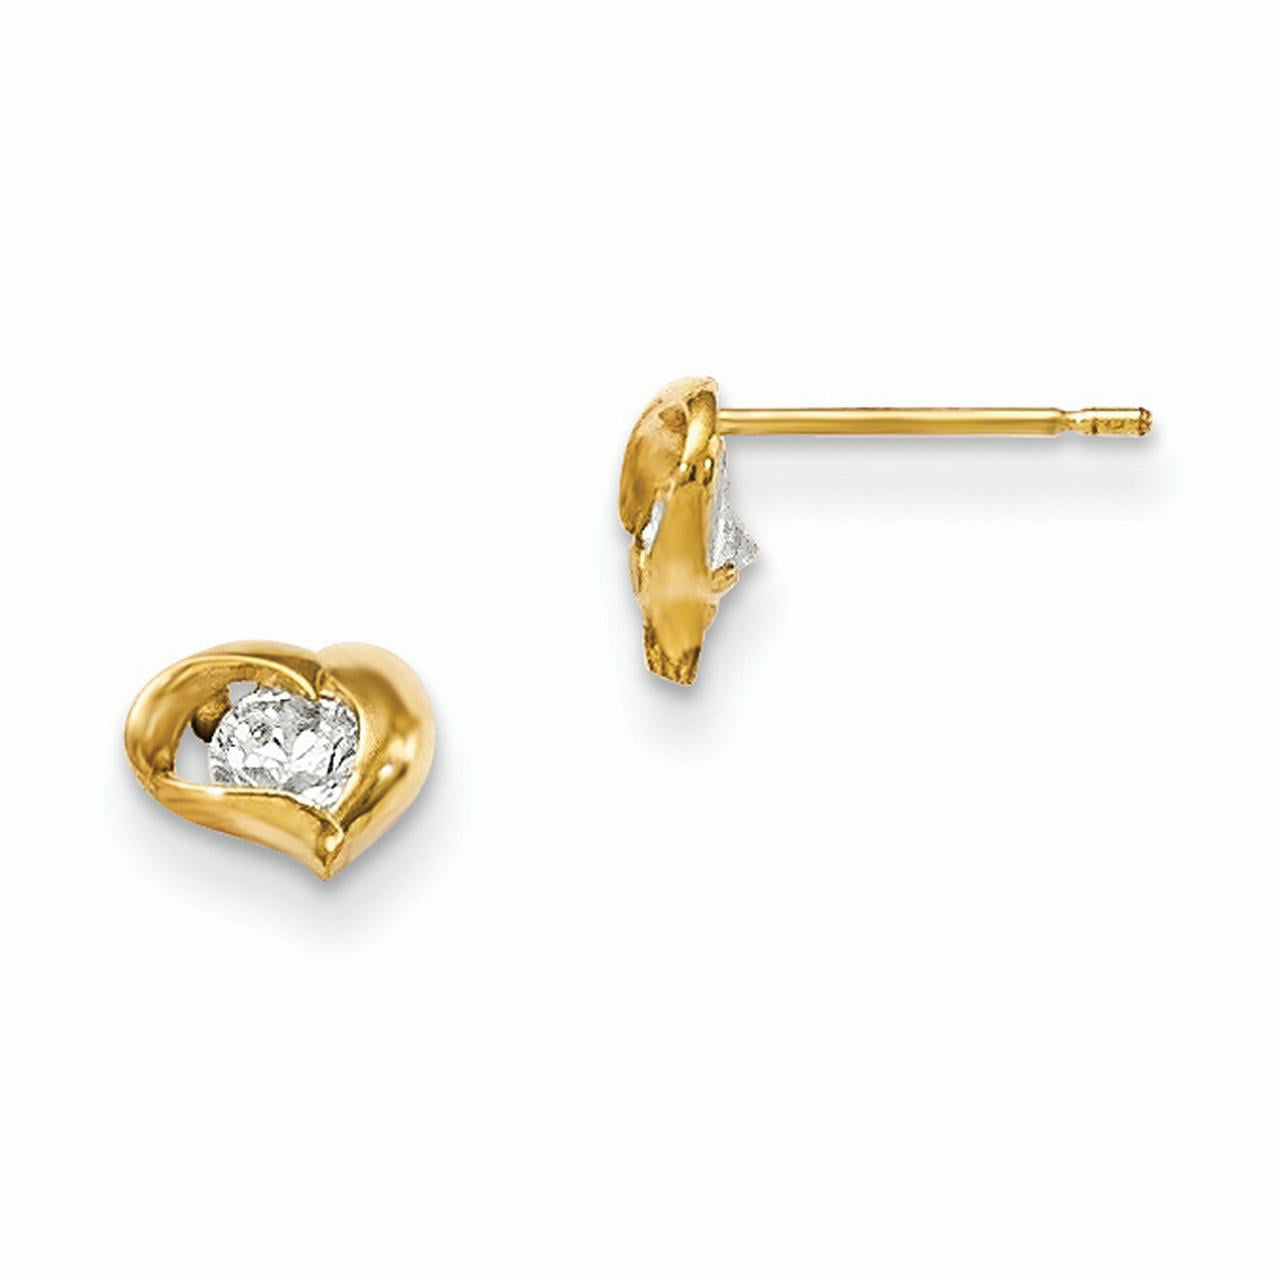 Details about   14K Yellow Gold Madi K Children's 6 MM CZ Heart Post Stud Earrings MSRP $72 